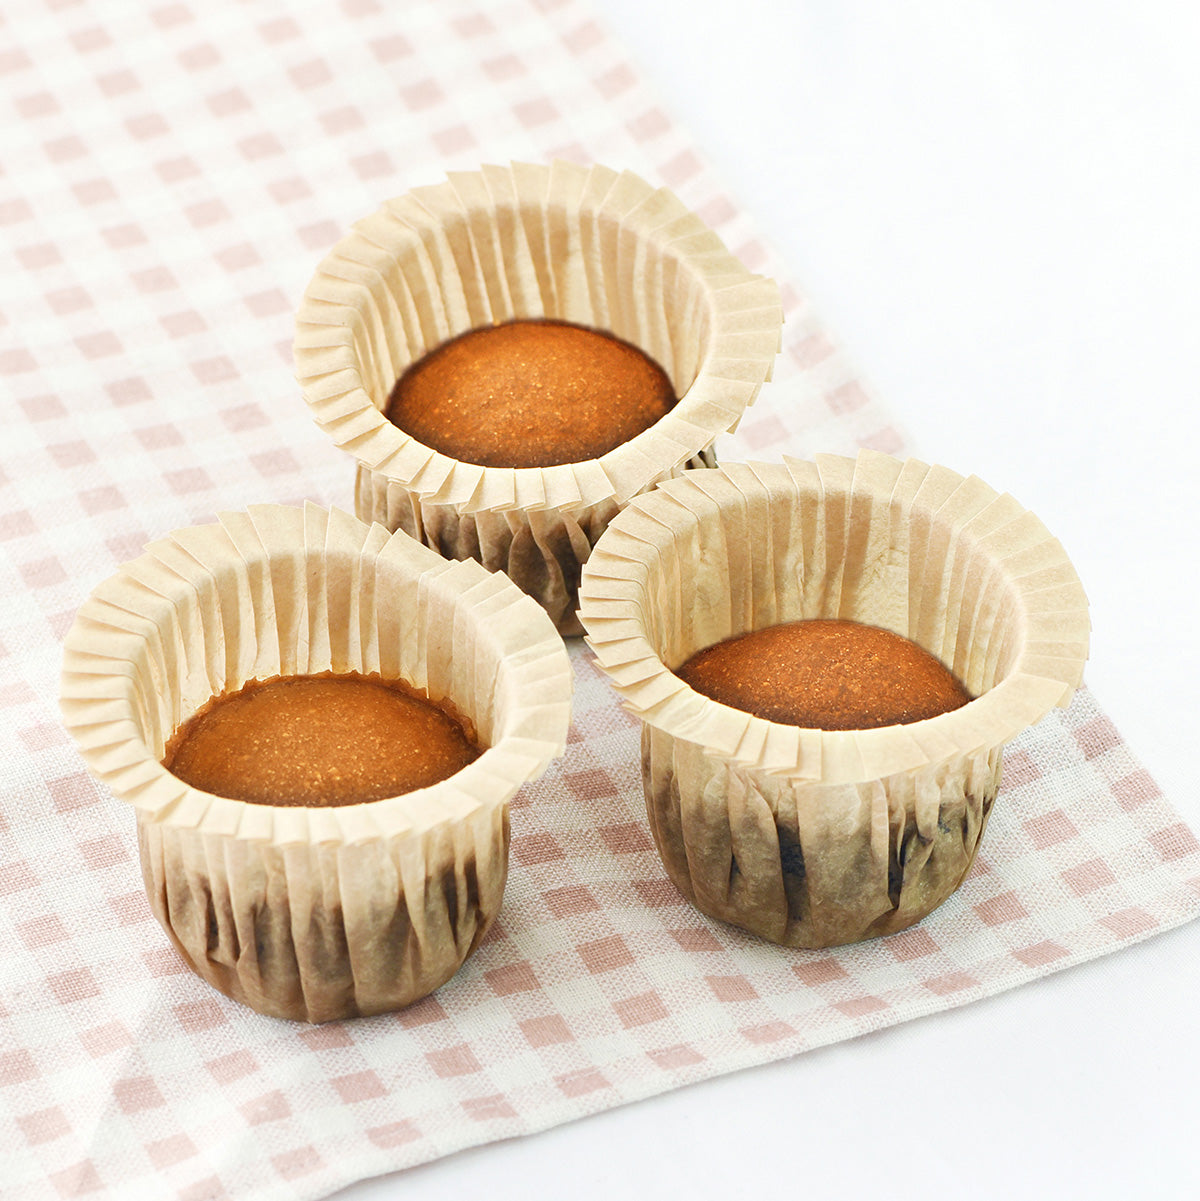 Pack of 60 Brown Cupcake Muffin Cases/Standard Baking Paper Cups Wraps Liners with Elegant Folded Edge (No Moulds Needed) -FiveSeasonStuff